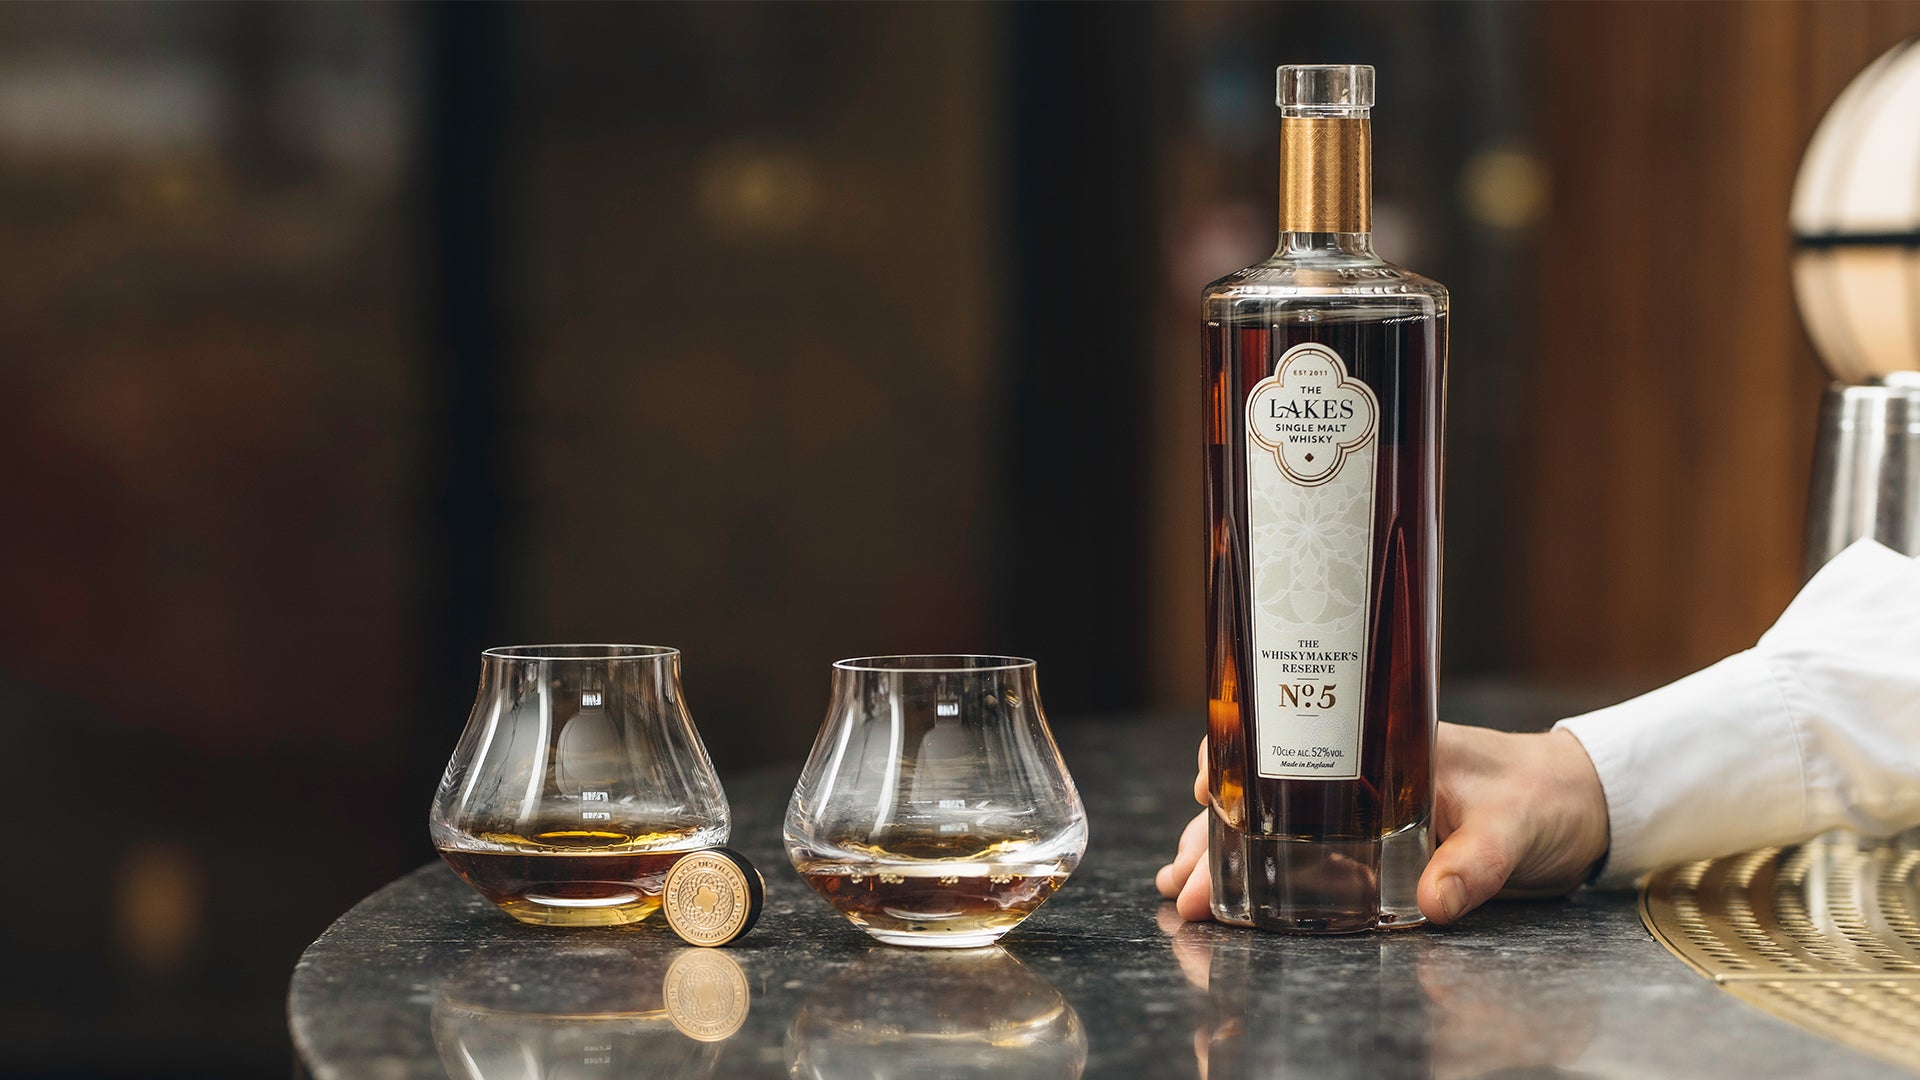 Introducing The Whiskymaker's Reserve No.5 | The Journal – The Lakes  Distillery